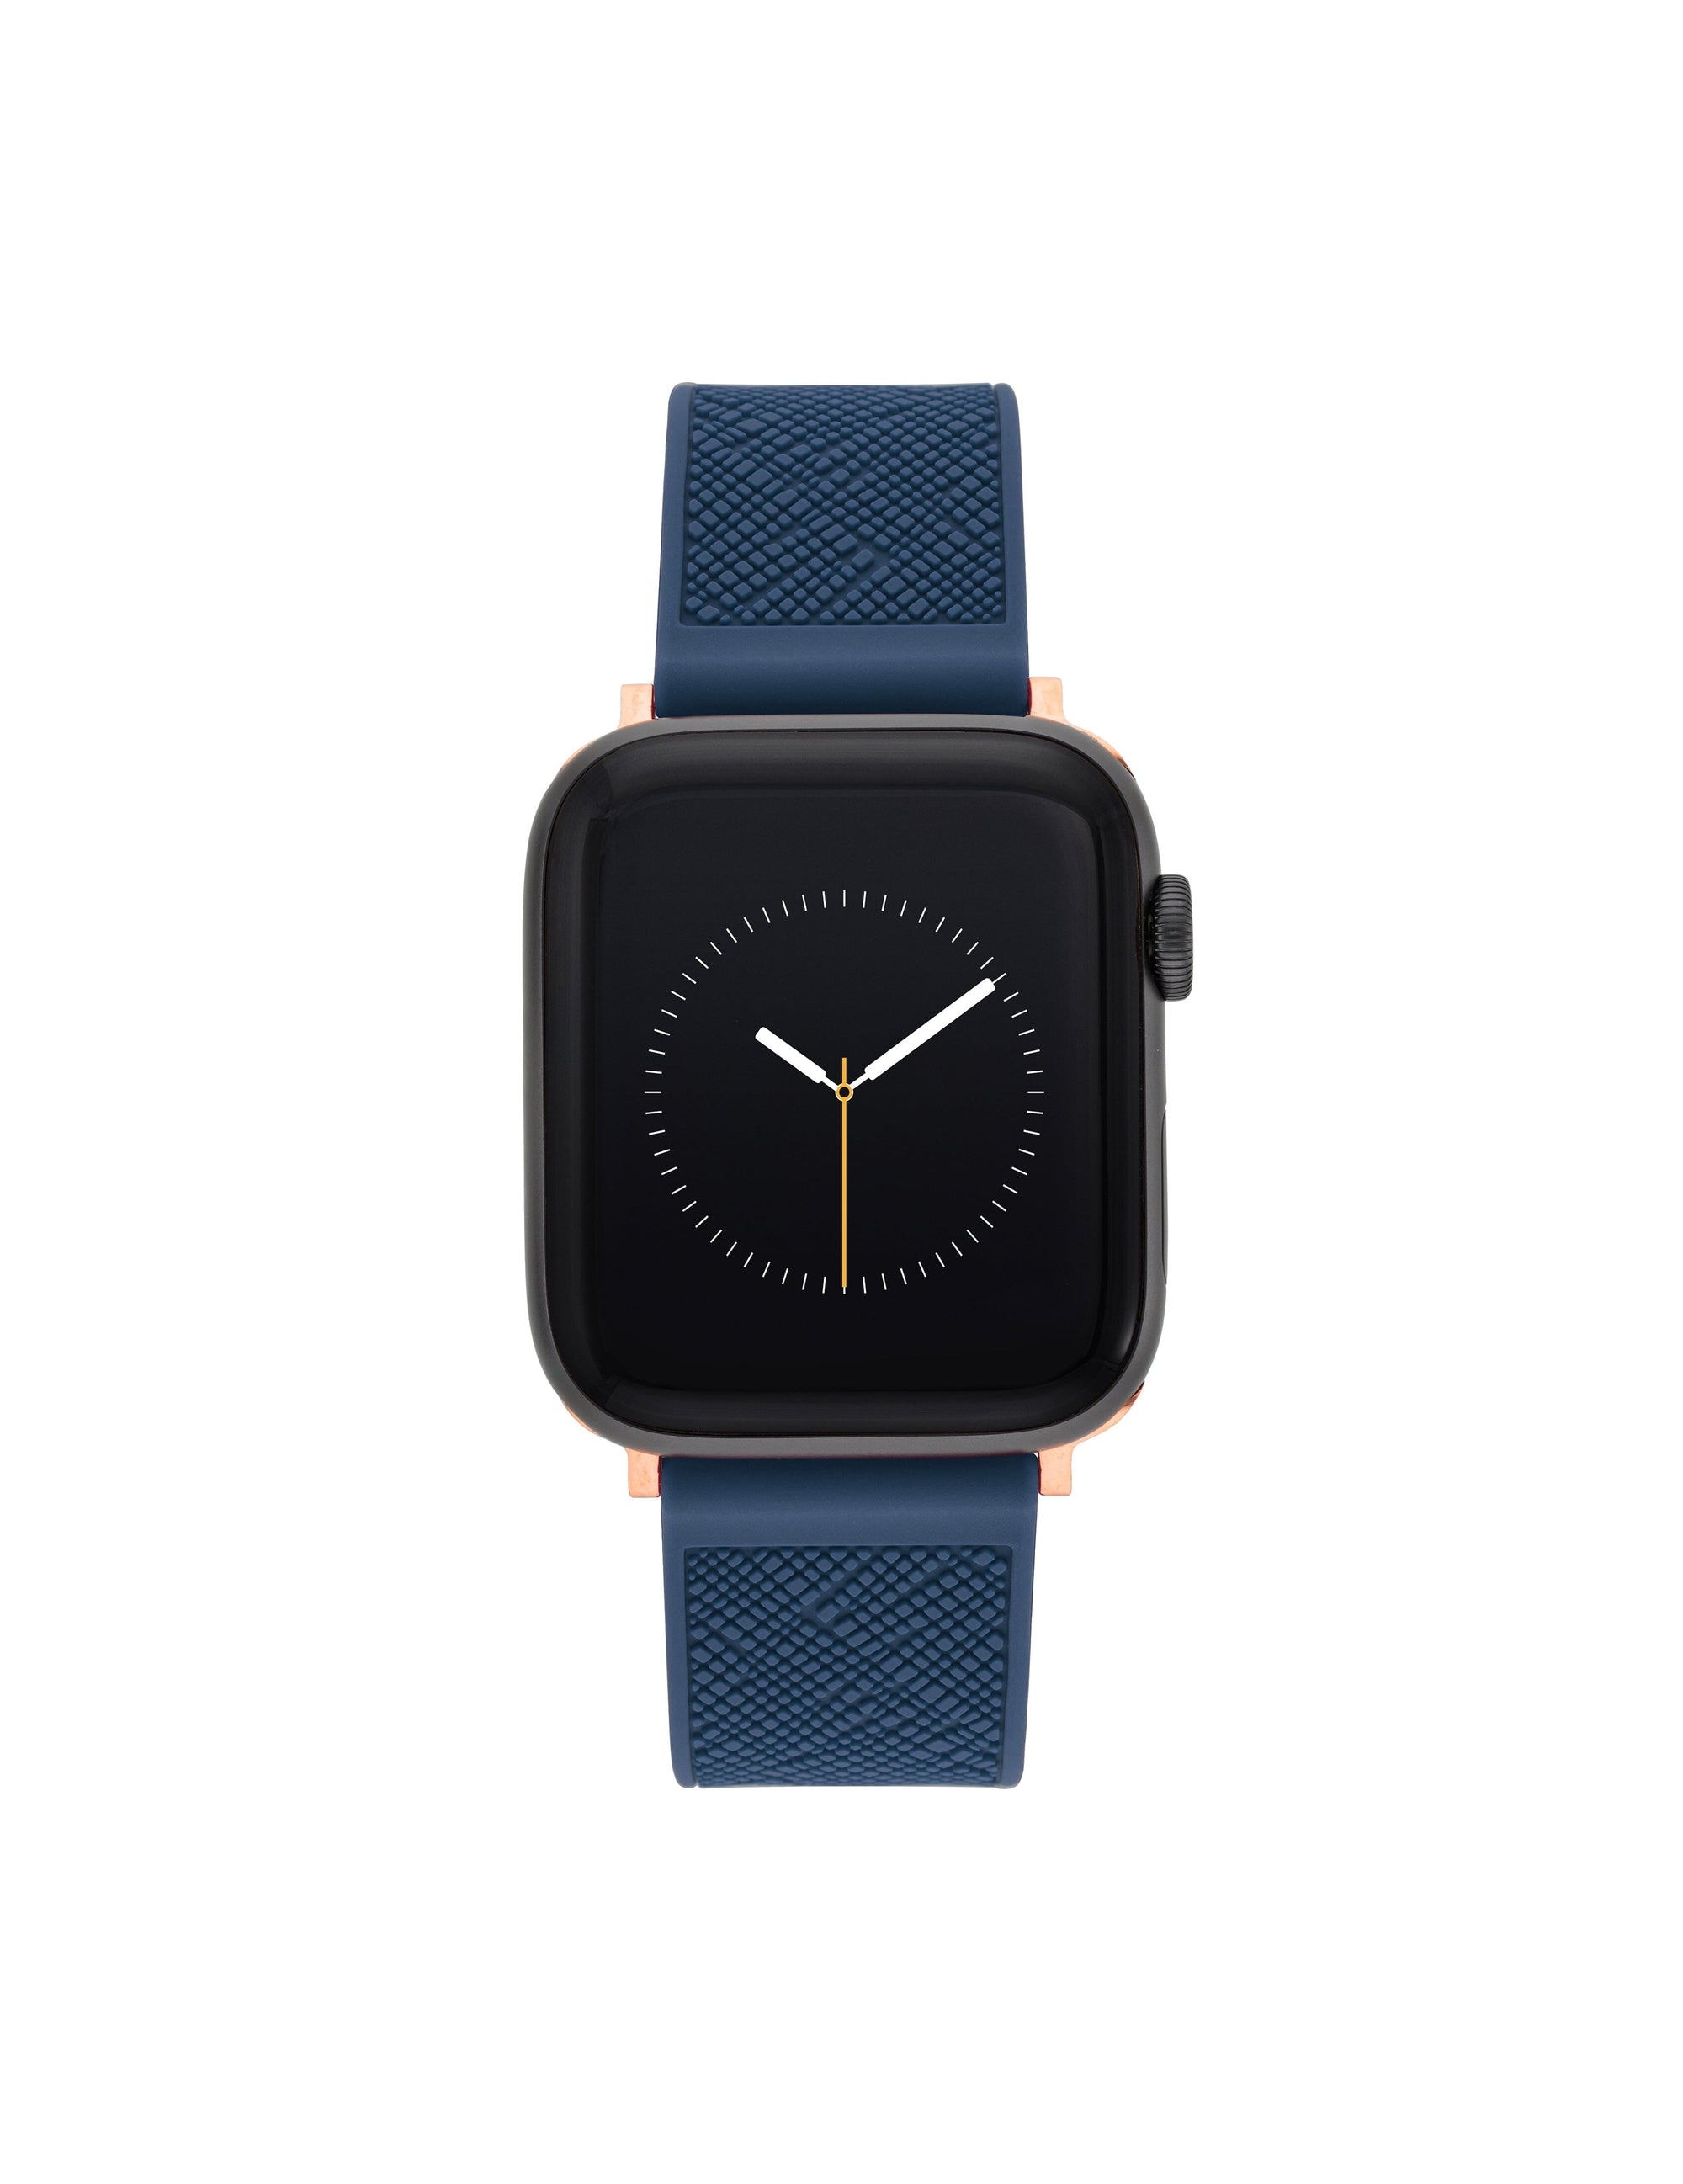 Anne Klein Rose Gold-Tone/ Navy Silicone Textured Band for Apple Watch®